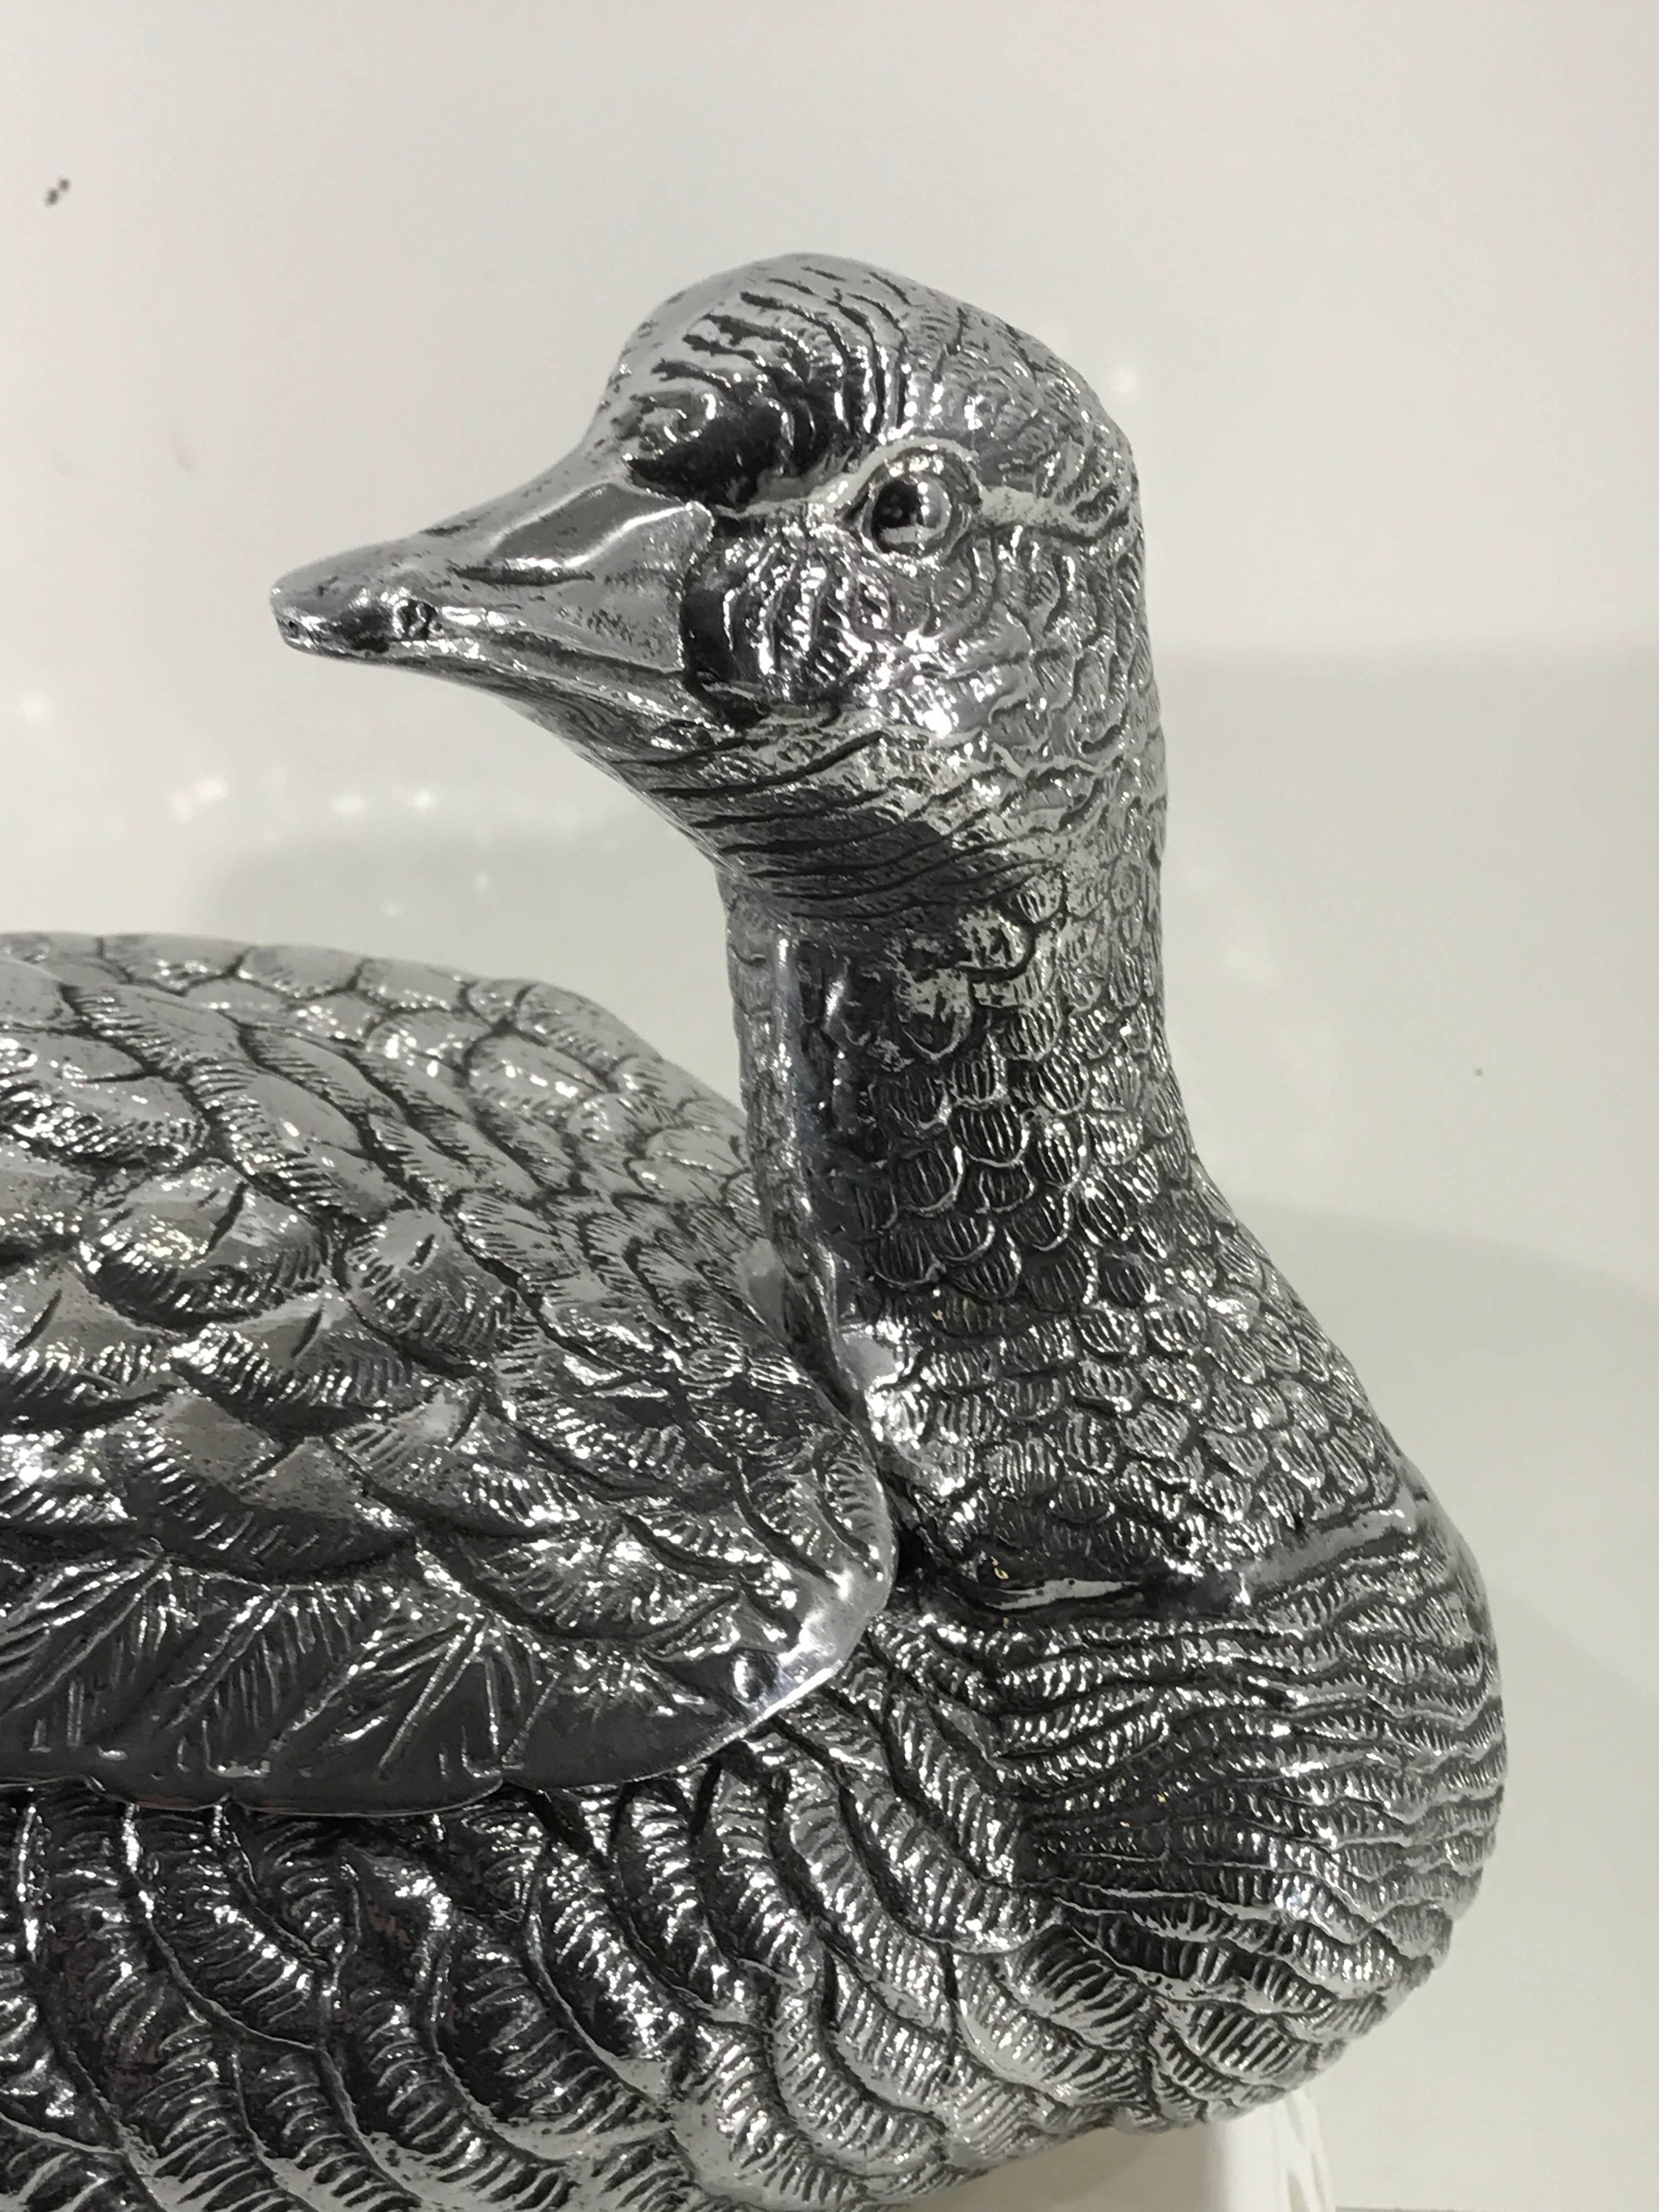 Shiny pewter duck and duckling tureen by Arthur Court, 1978.